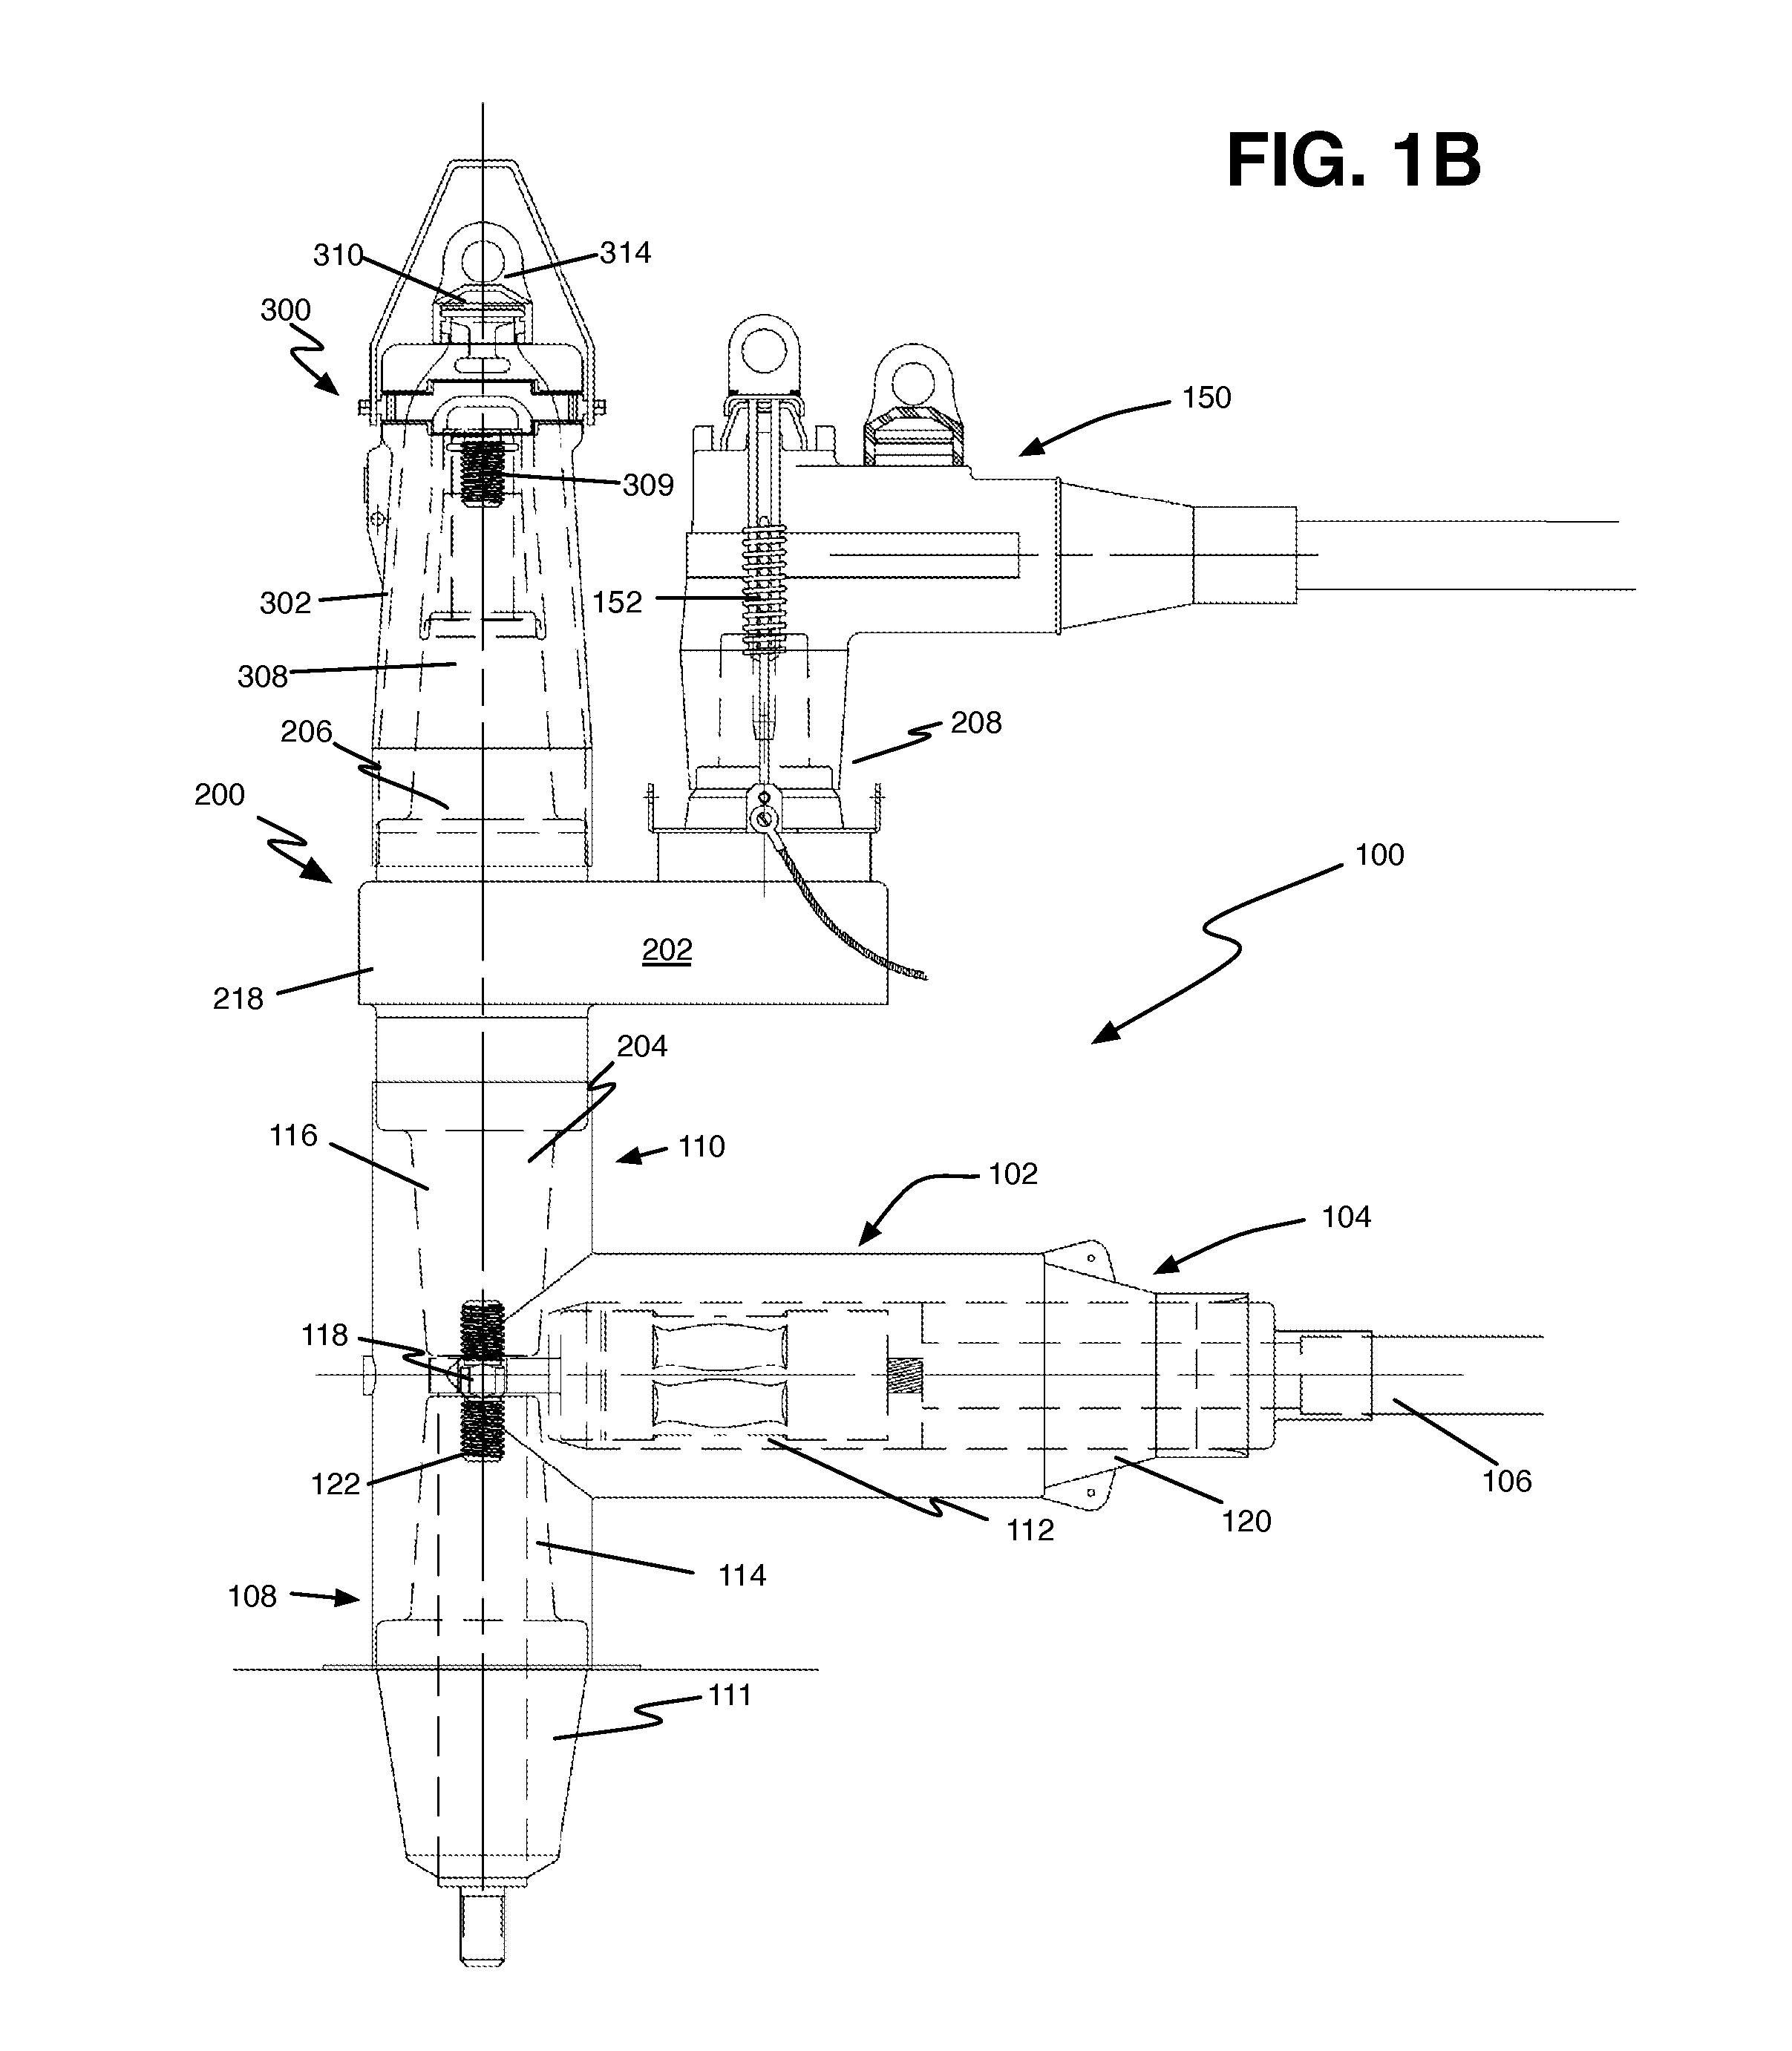 Grounding link for electrical connector mechanism